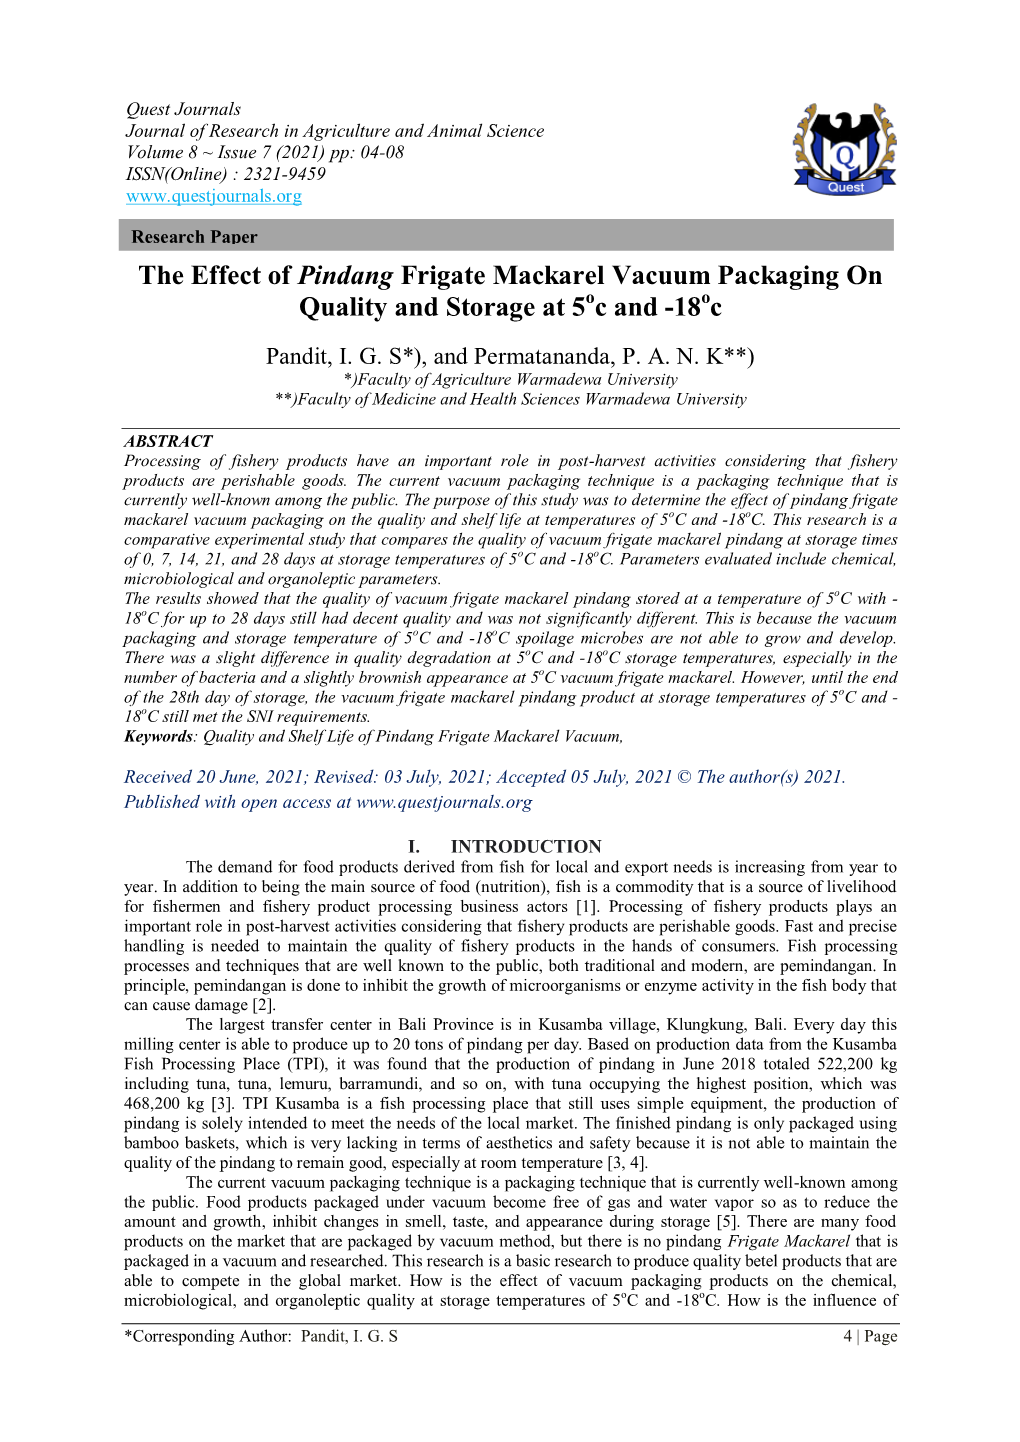 The Effect of Pindang Frigate Mackarel Vacuum Packaging on Quality and Storage at 5Oc and -18Oc